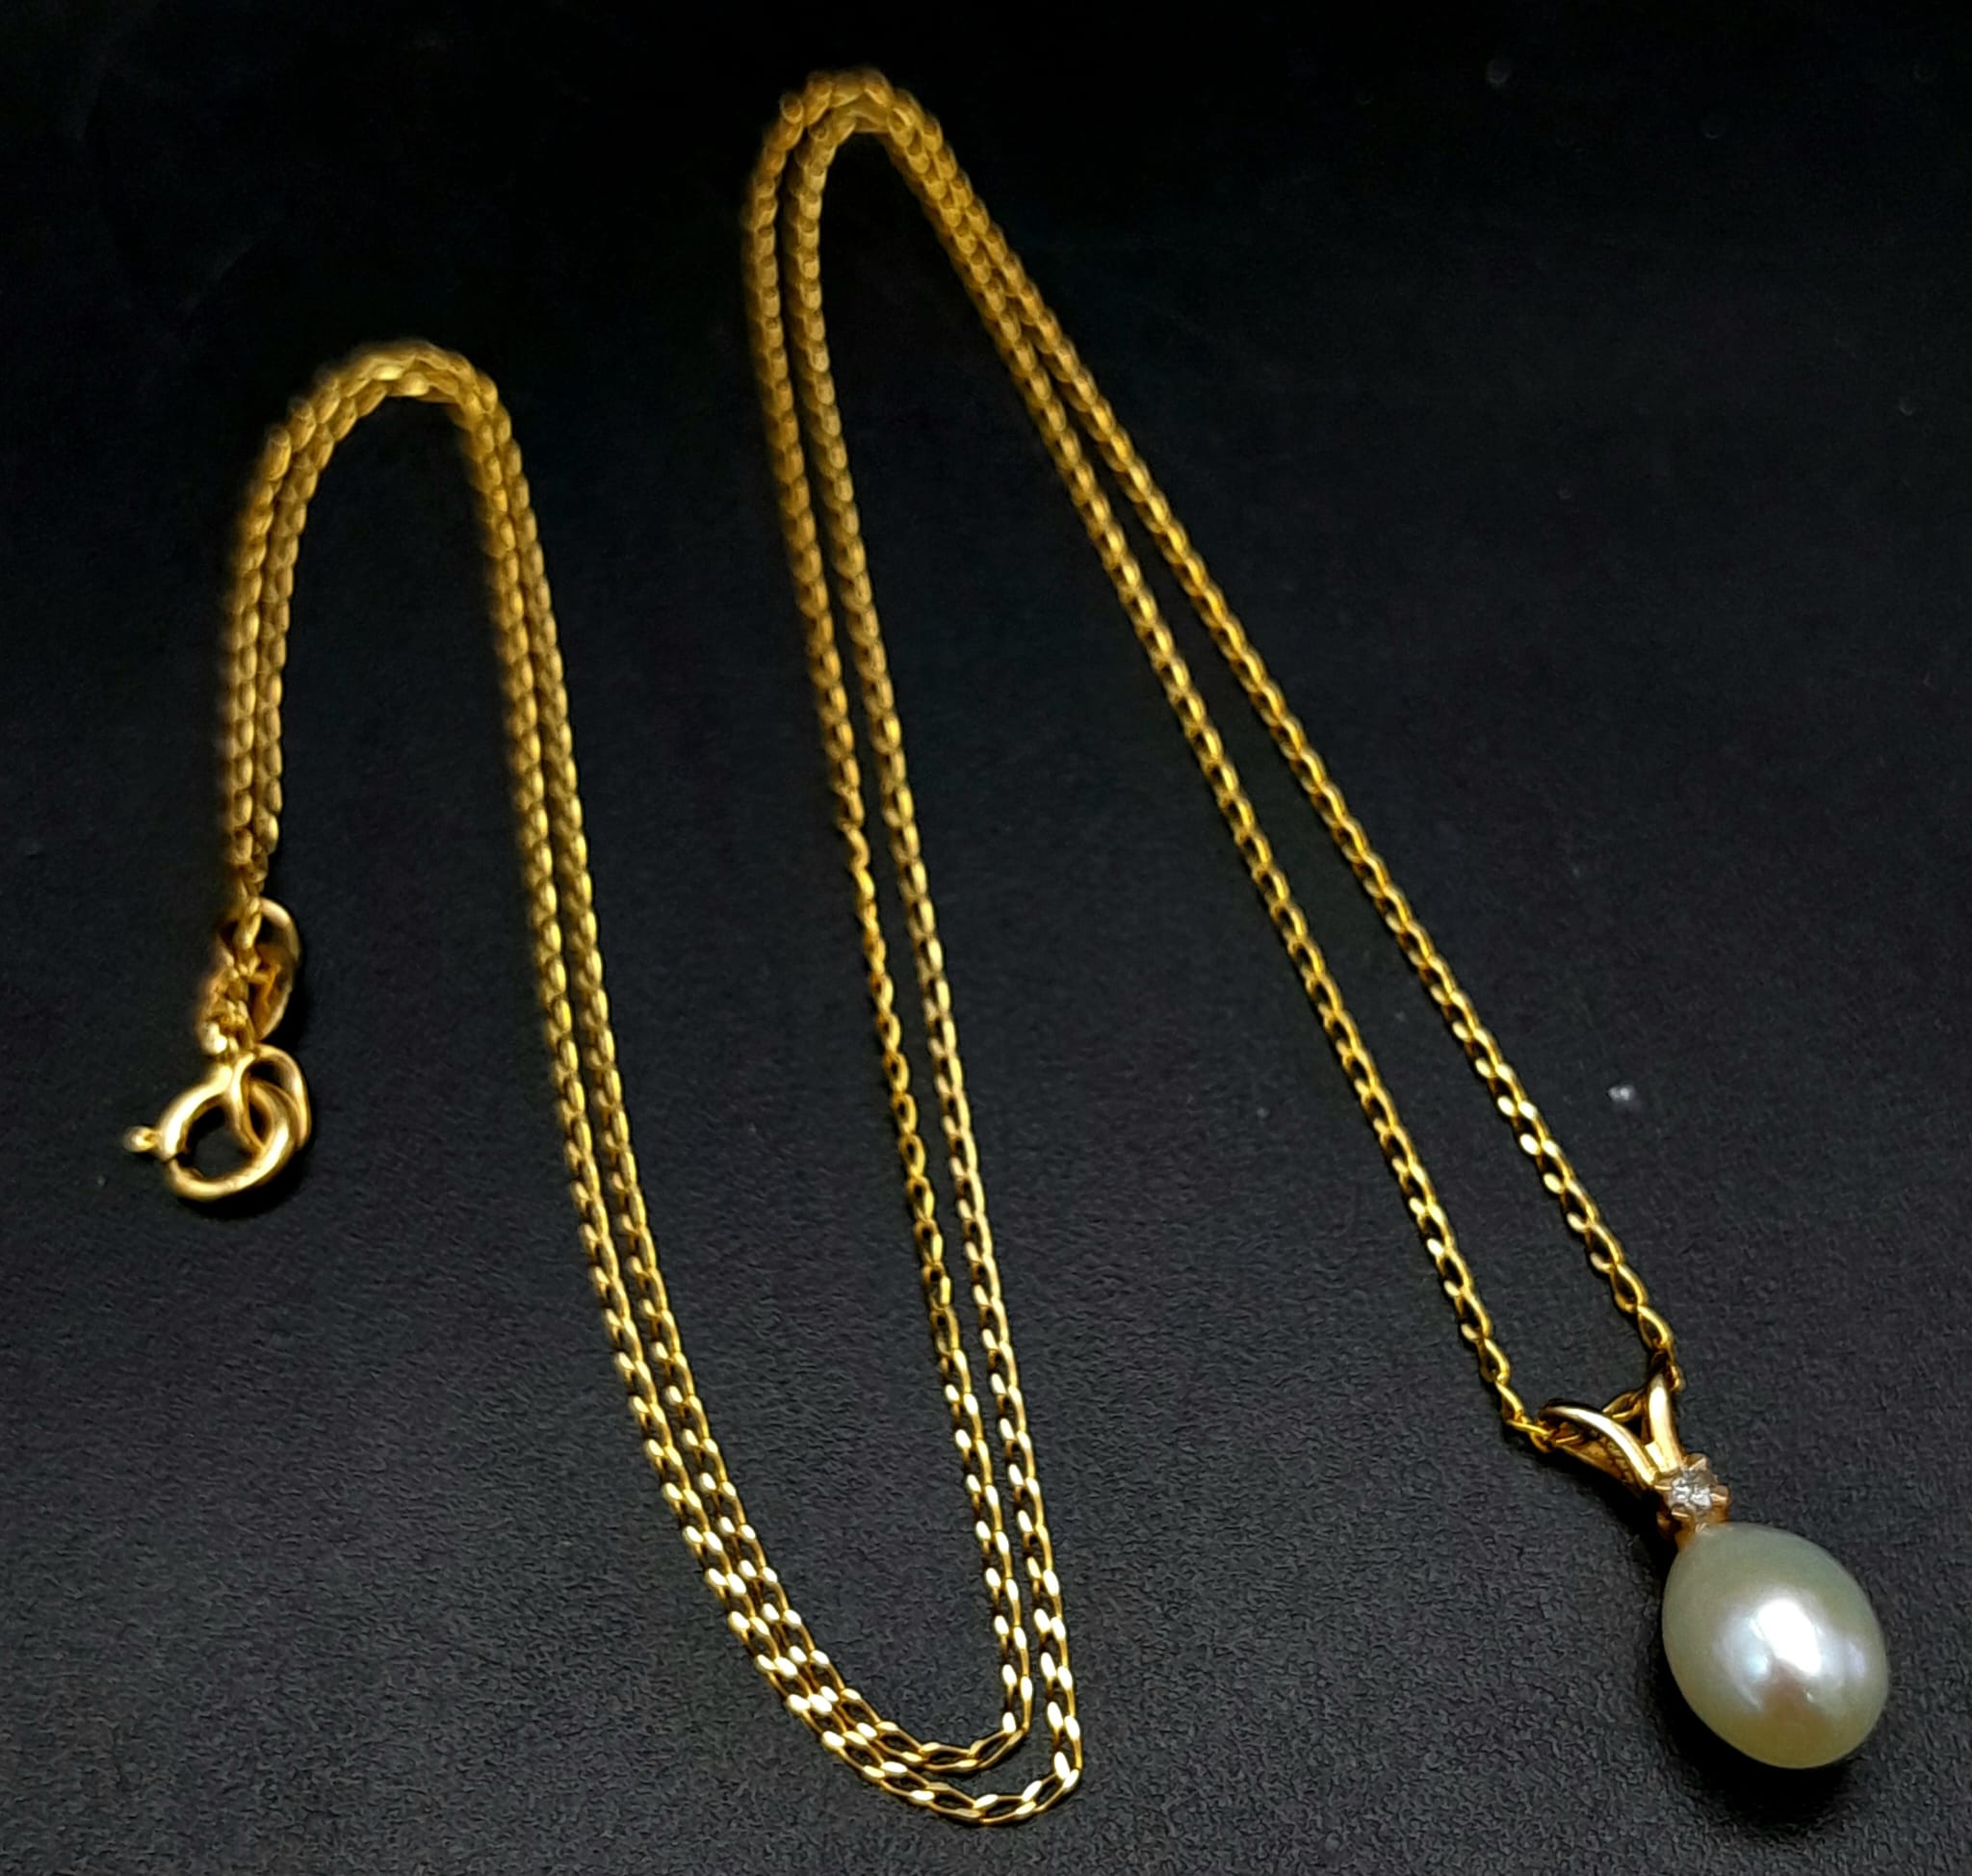 An Unworn 9 Carat Yellow Gold Pearl and Diamond Set Necklace & Matching Earrings. 46cm Length Chain, - Image 10 of 11